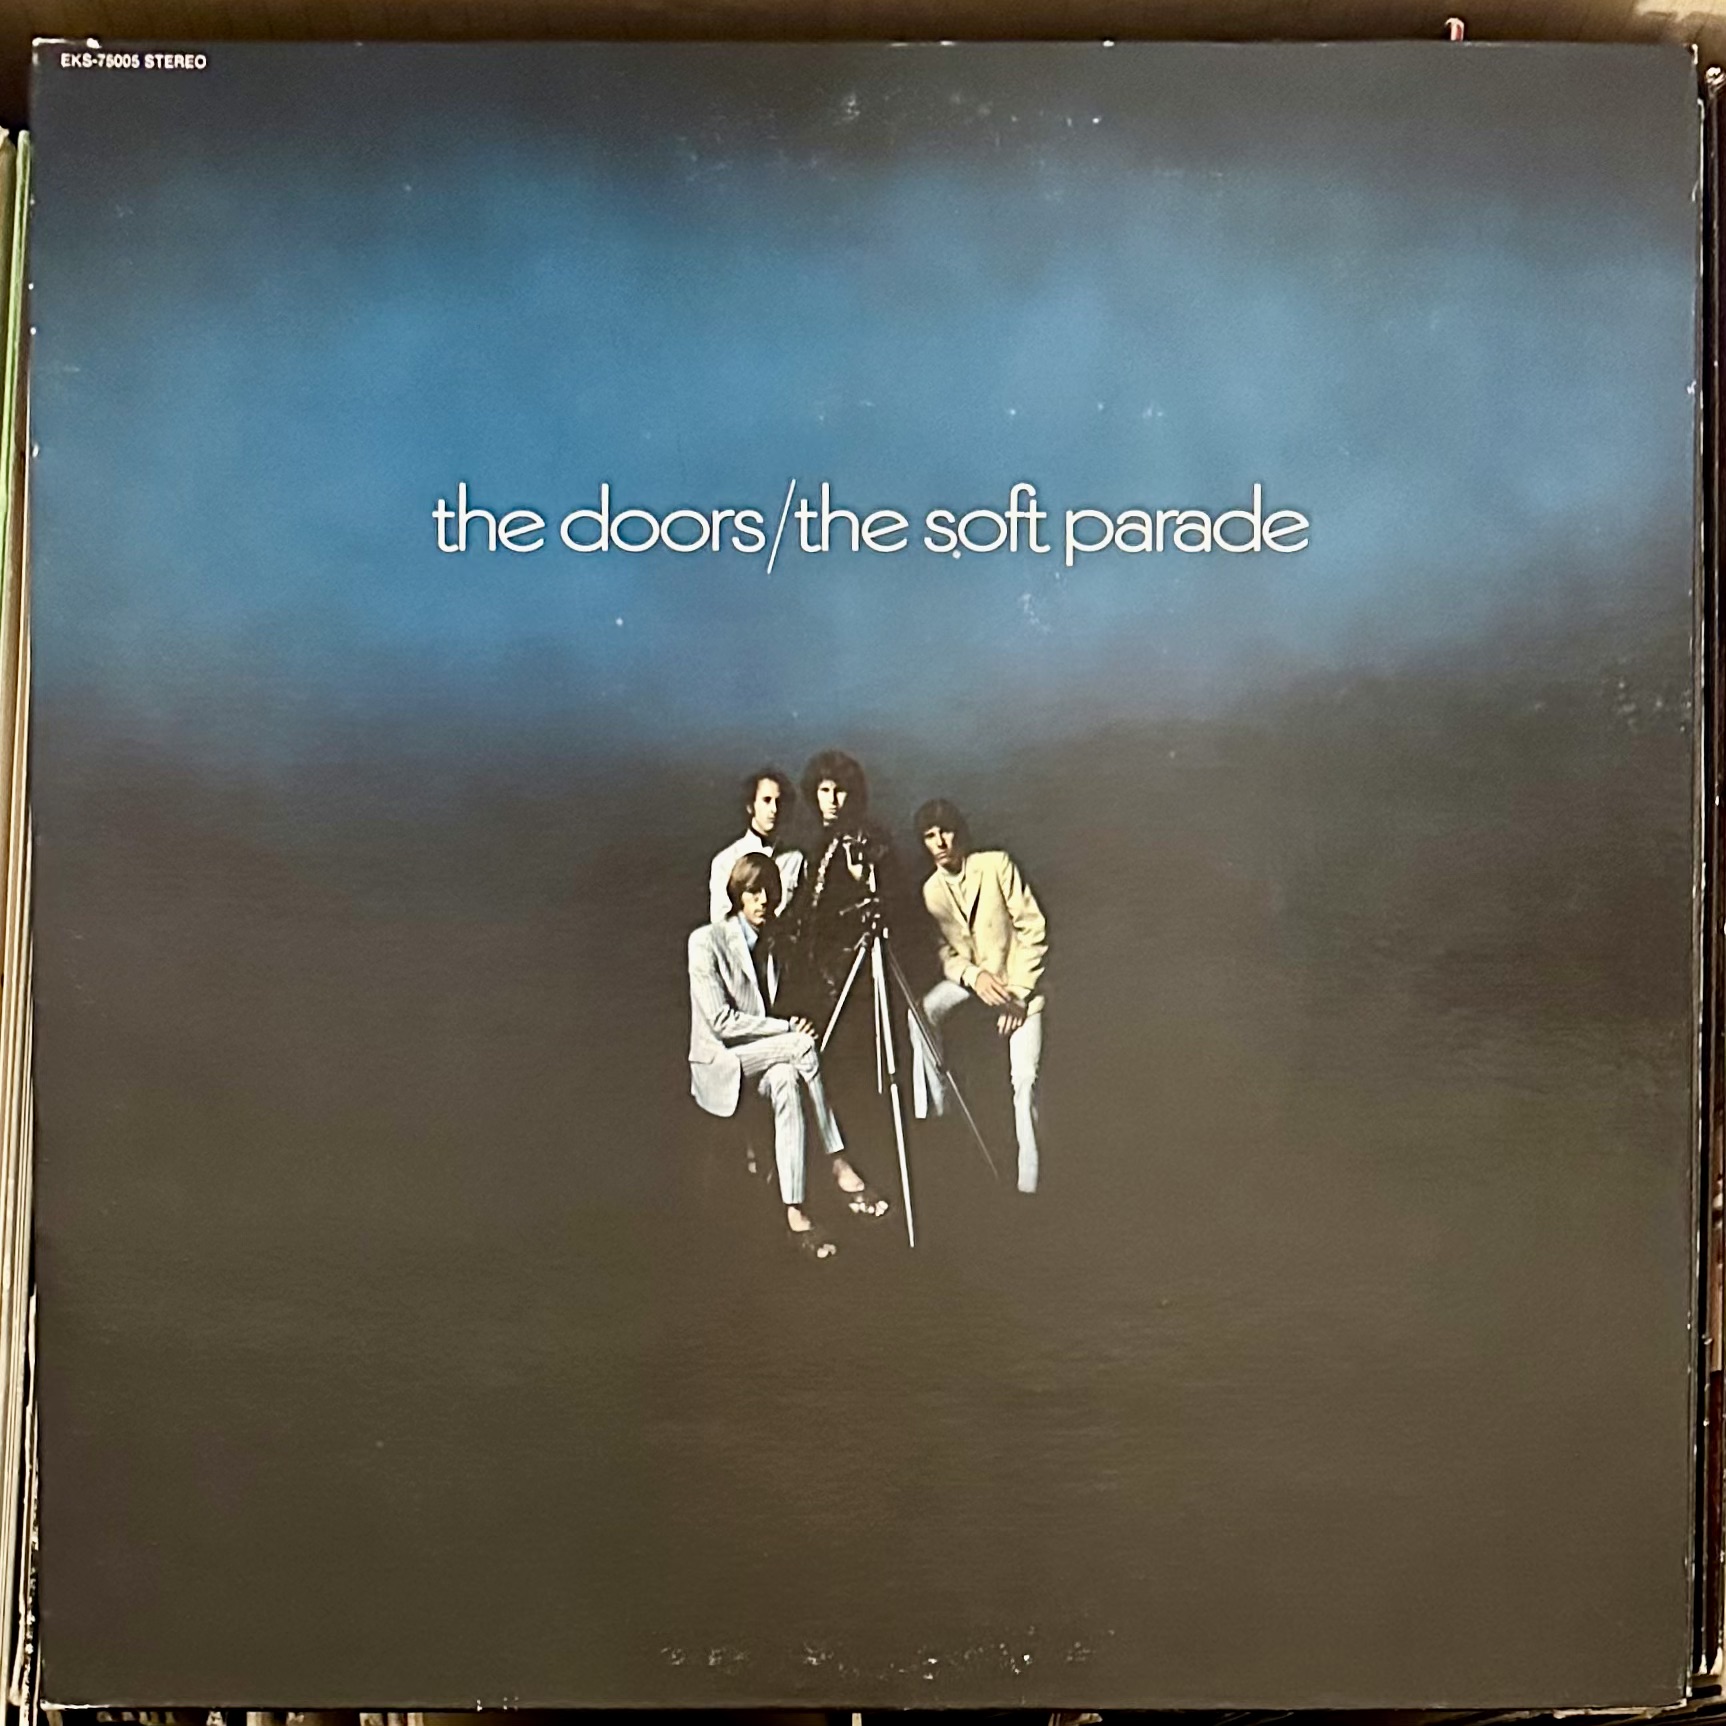 The Soft Parade by the Doors